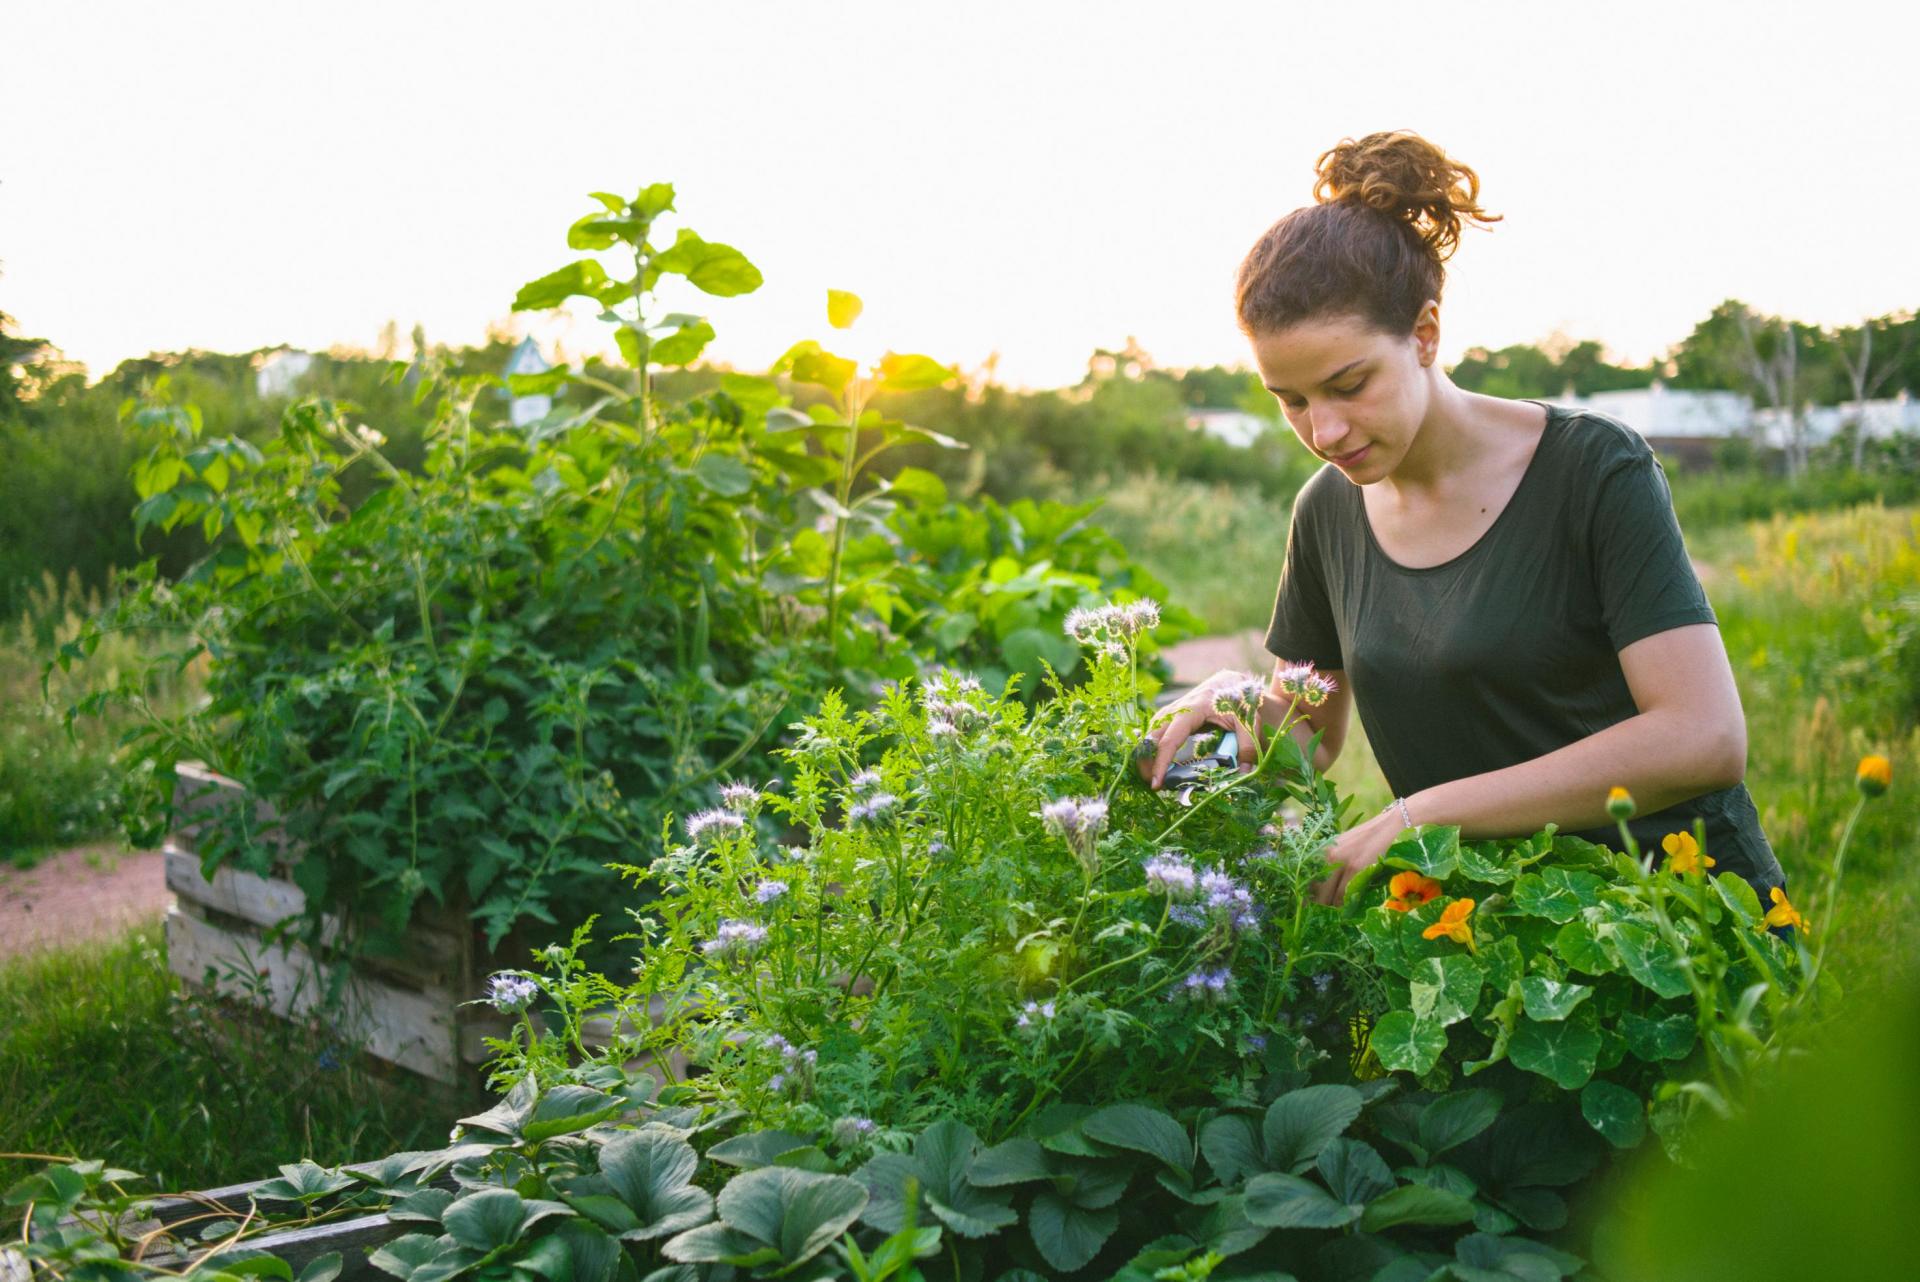 A woman is gardening in a raised flower bed